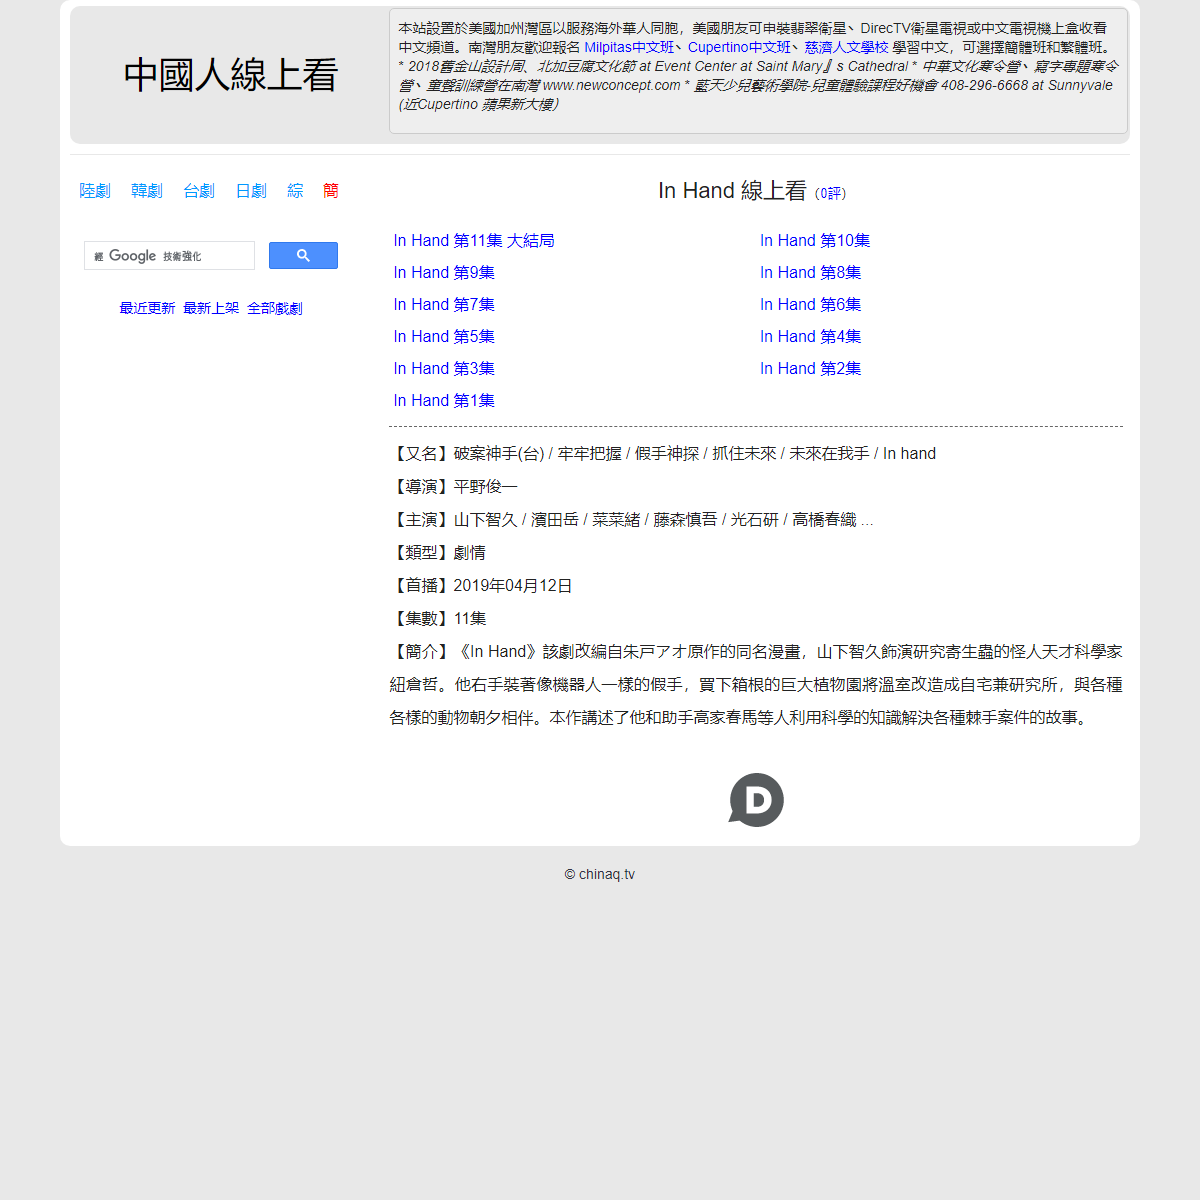 A complete backup of https://chinaq.tv/jp190412b/